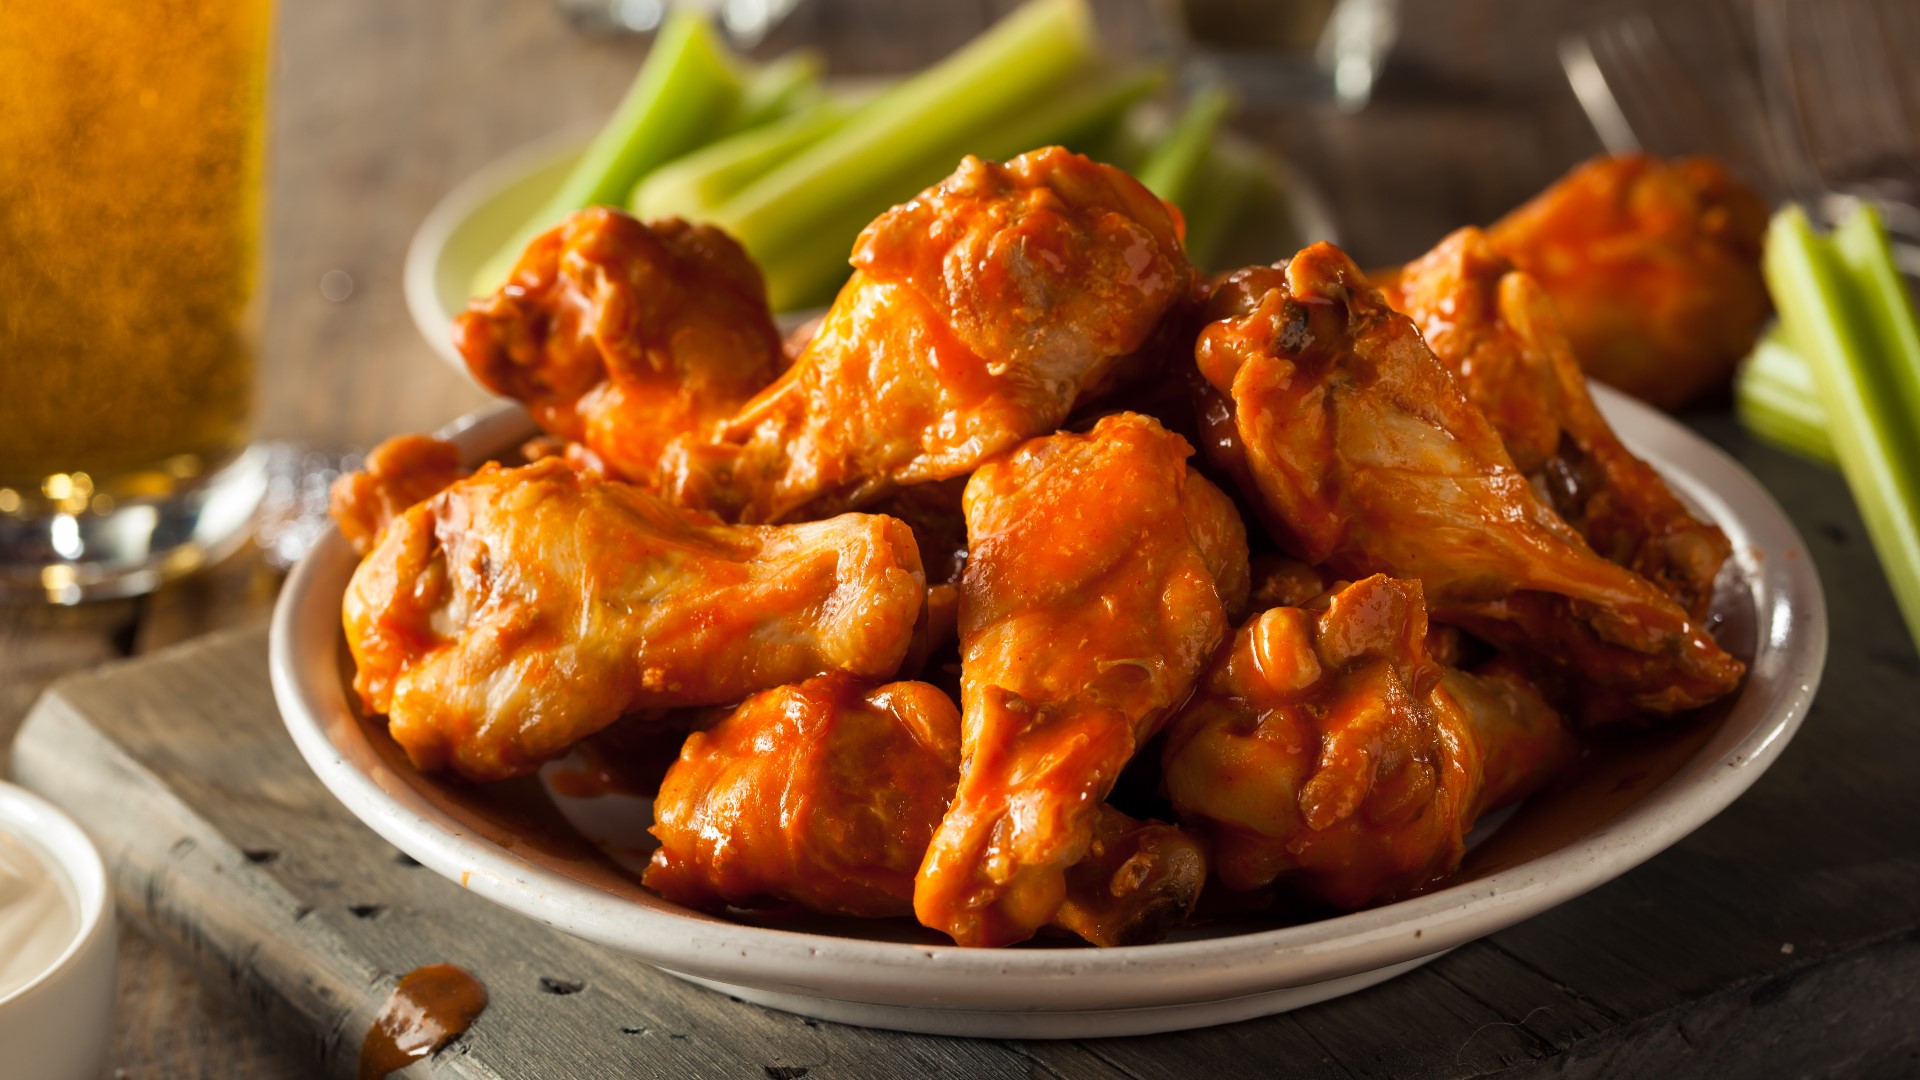 More than 1.3 billion chicken wings will be eaten on Super Bowl Sunday in the U.S., and other eye-popping stats for the big game.